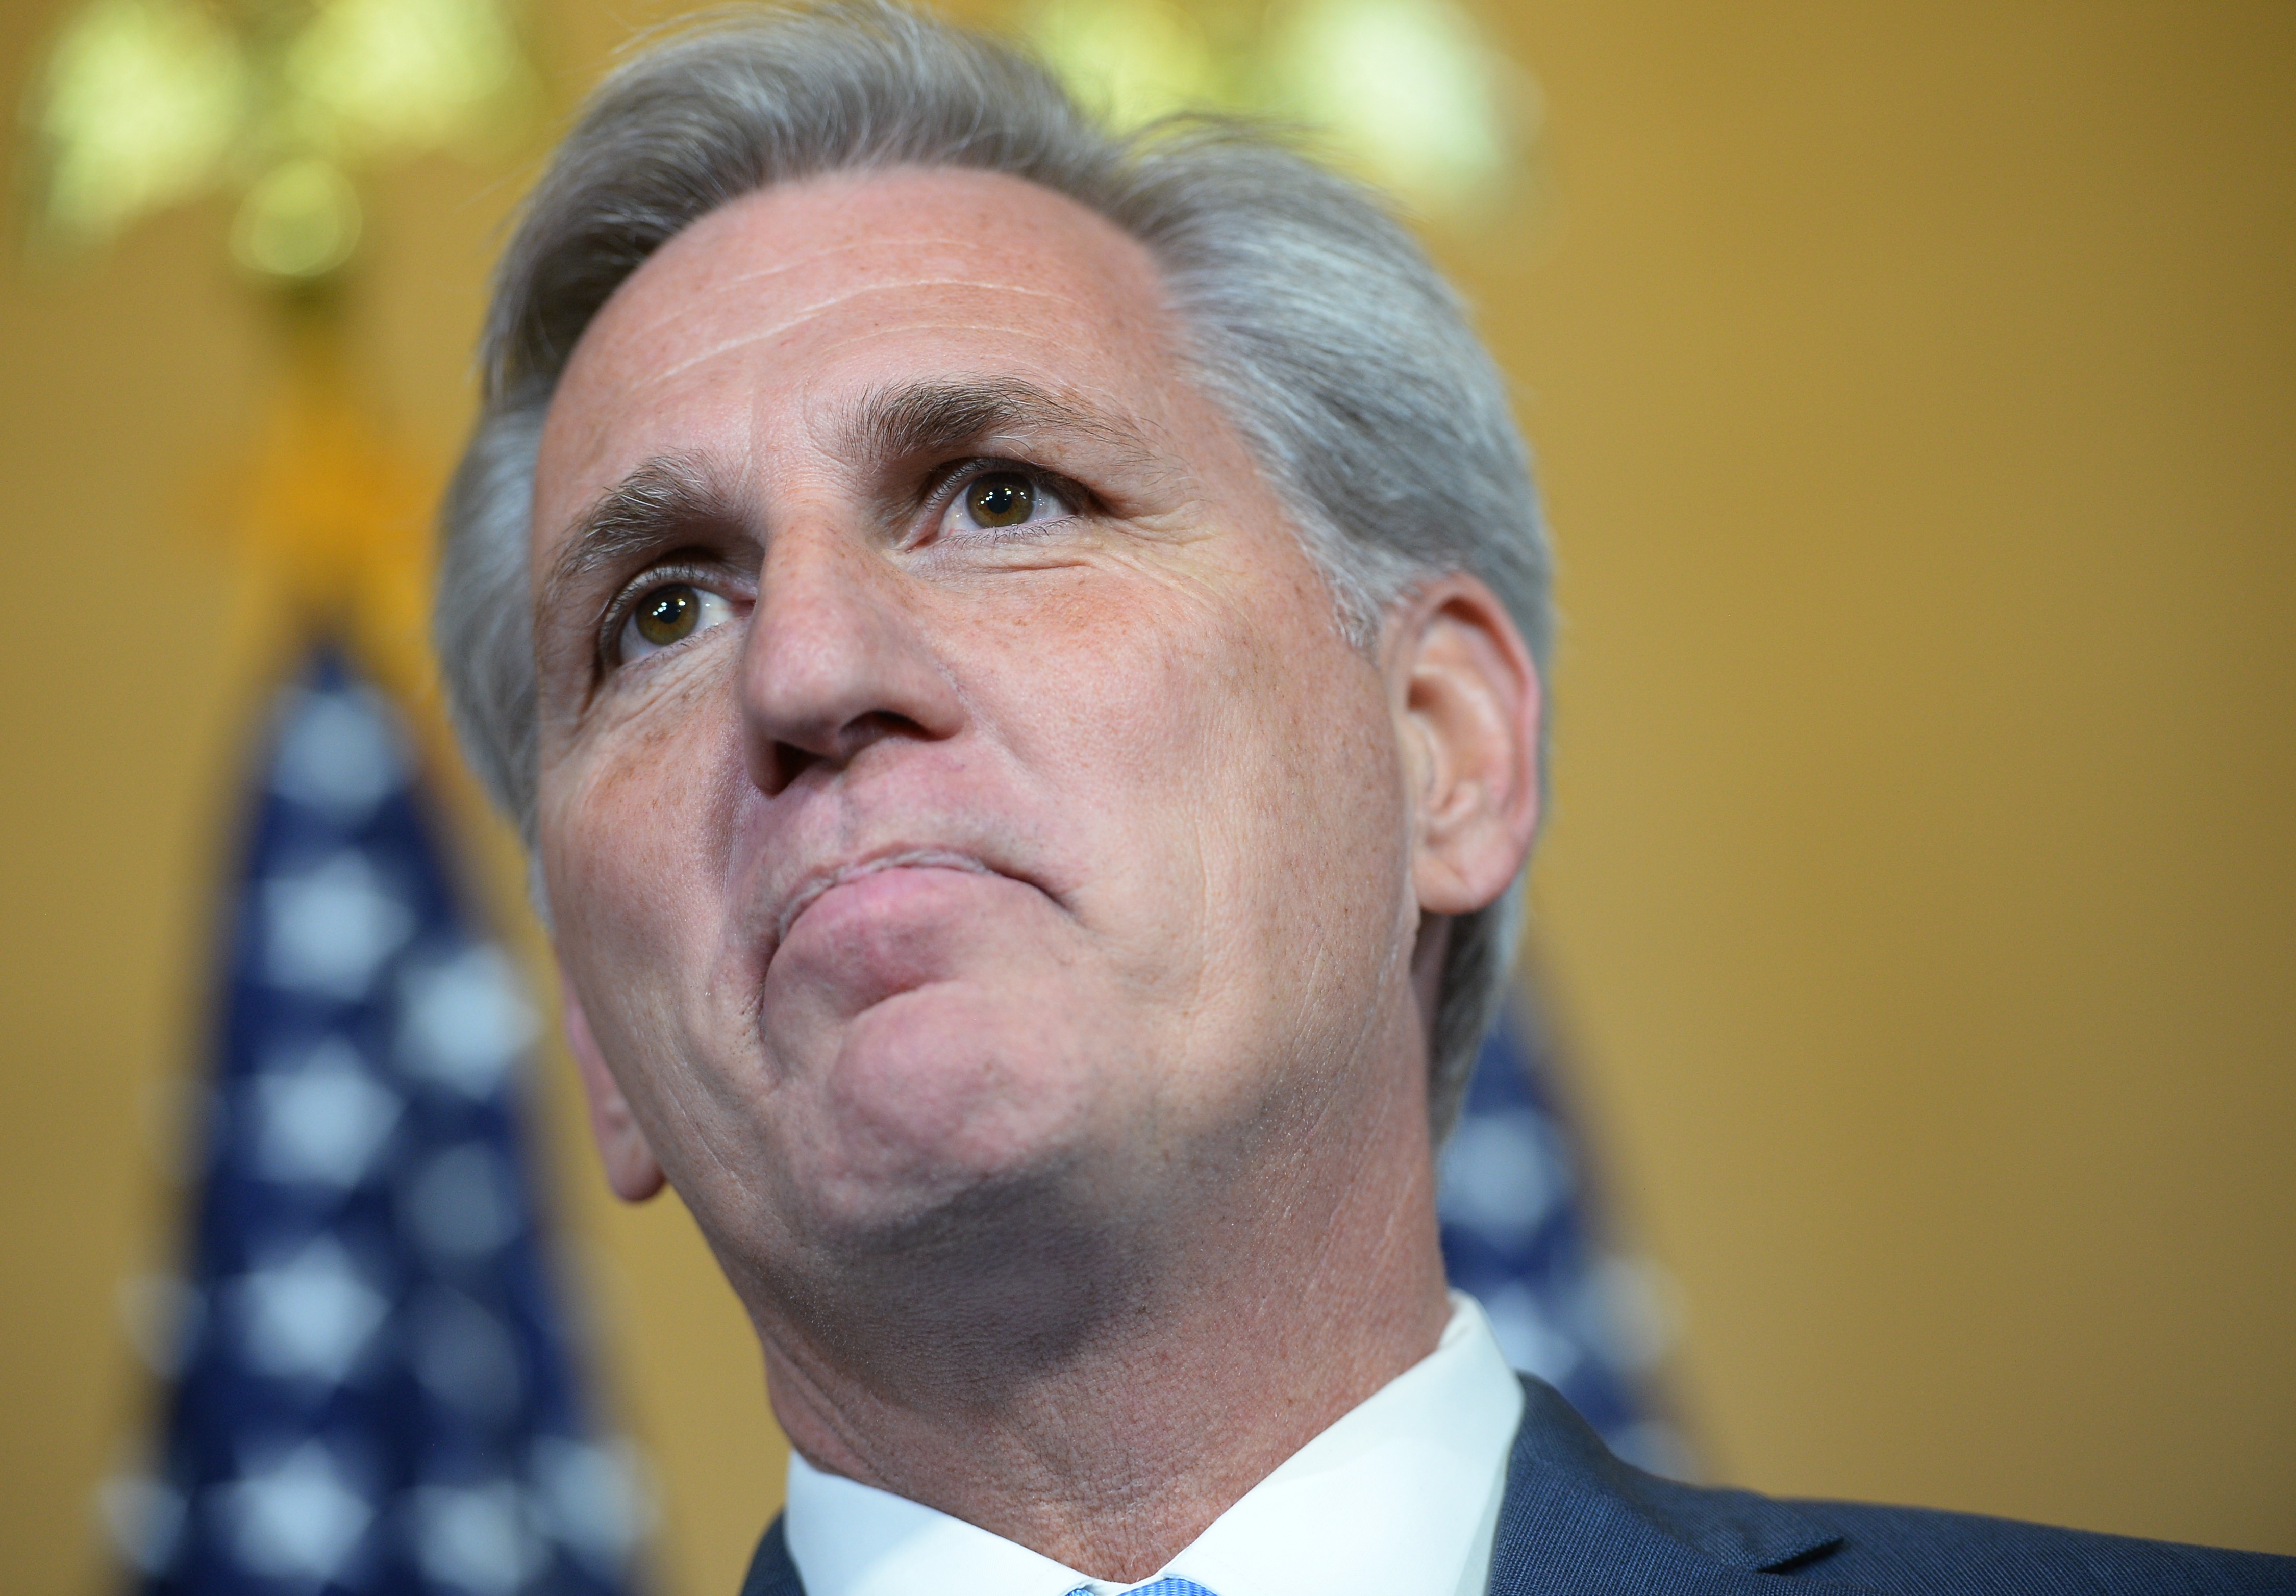 US Representative Kevin McCarthy speaks following the Republican nomination election for House speaker in the Longworth House Office Building on October 8, 2015 in Washington, DC. The Republican frontrunner to be the new speaker of the US House of Representatives, Kevin McCarthy, abruptly dropped out of the race Thursday, lawmakers said, amid a revolt by the party's hard-line conservatives. AFP PHOTO/MANDEL NGAN / AFP PHOTO / MANDEL NGAN